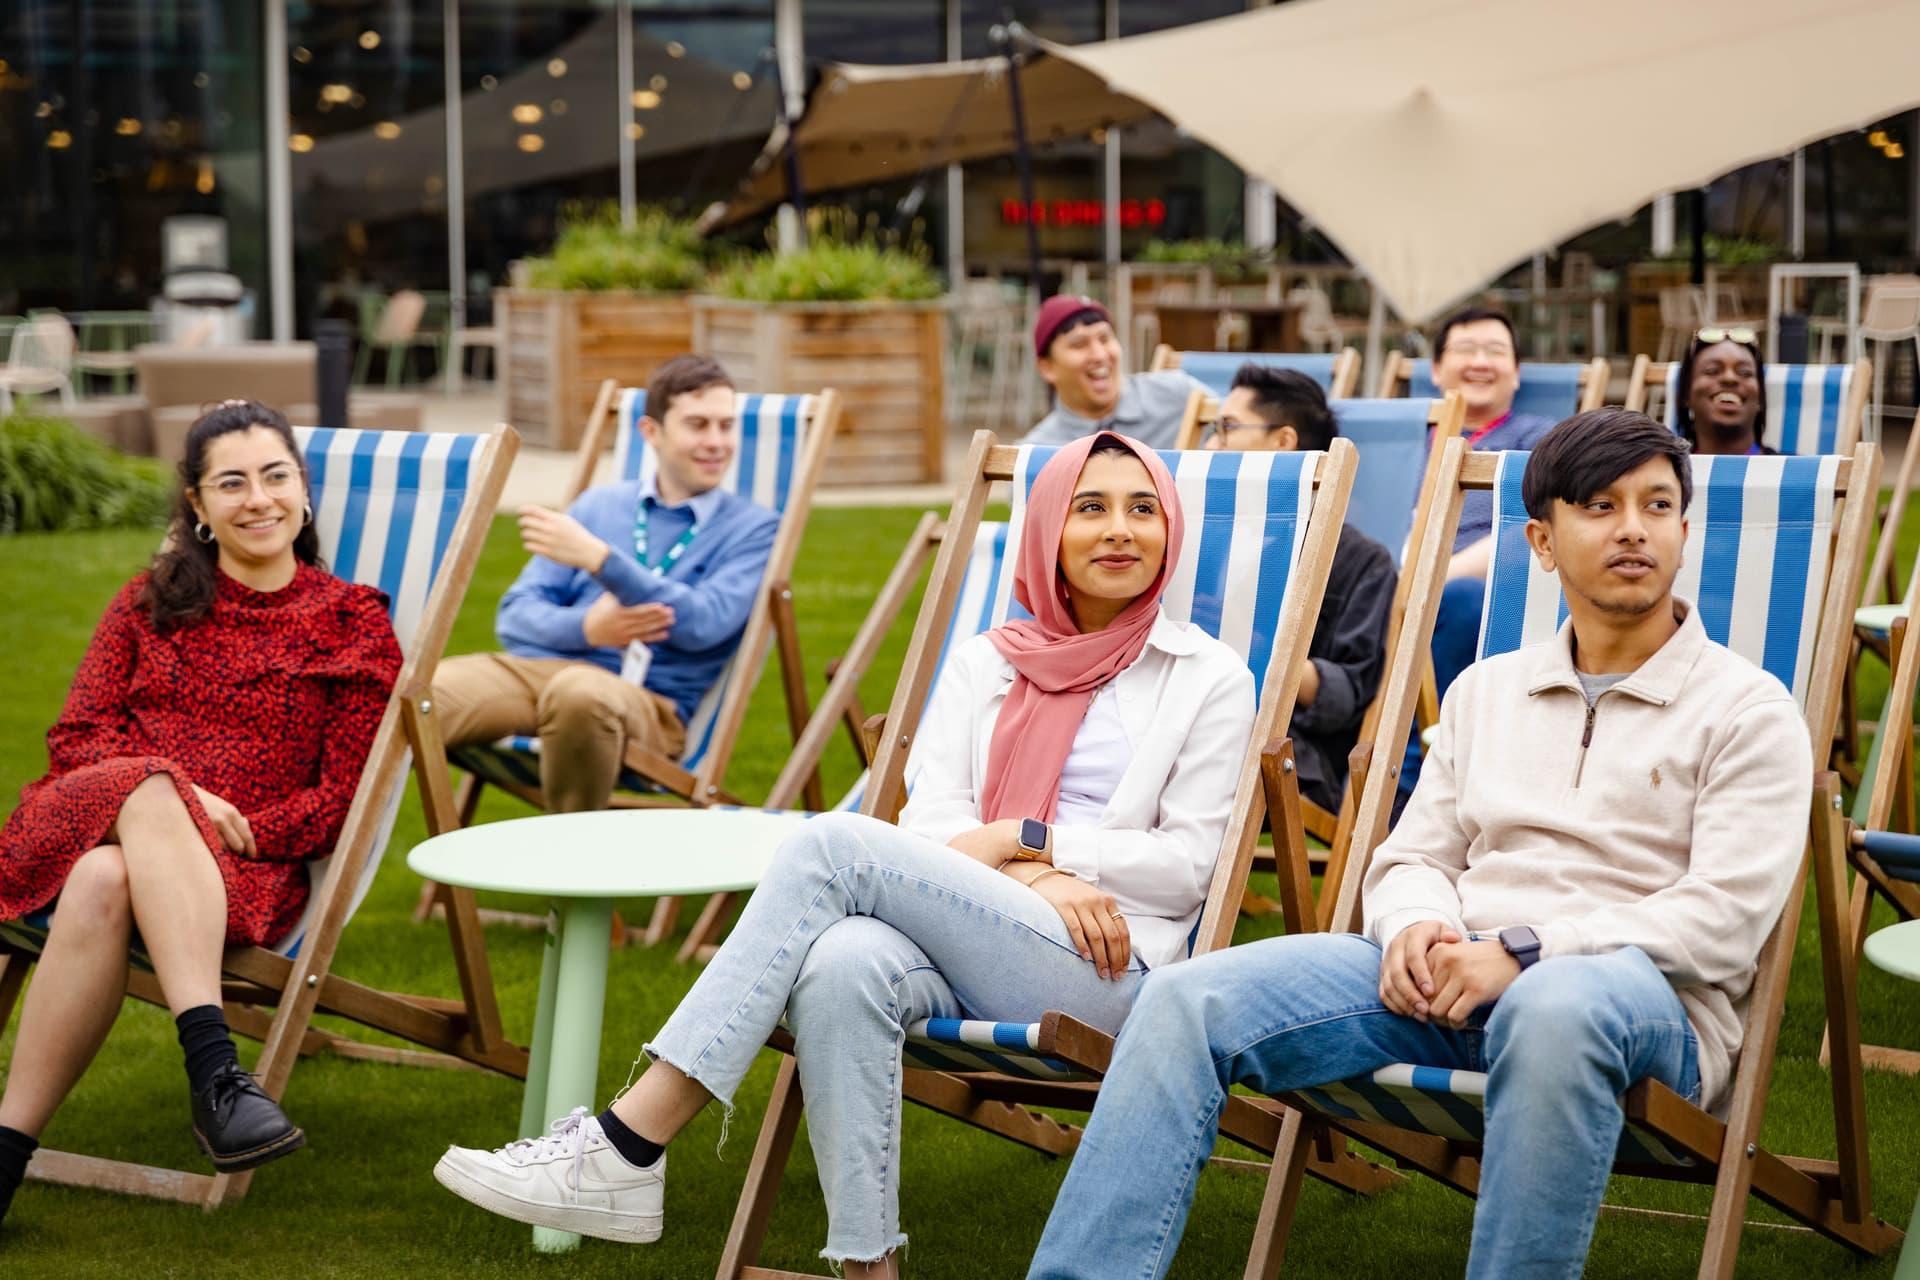 A group of people sitting on striped deckchairs, smiling and looking at someone in the distance